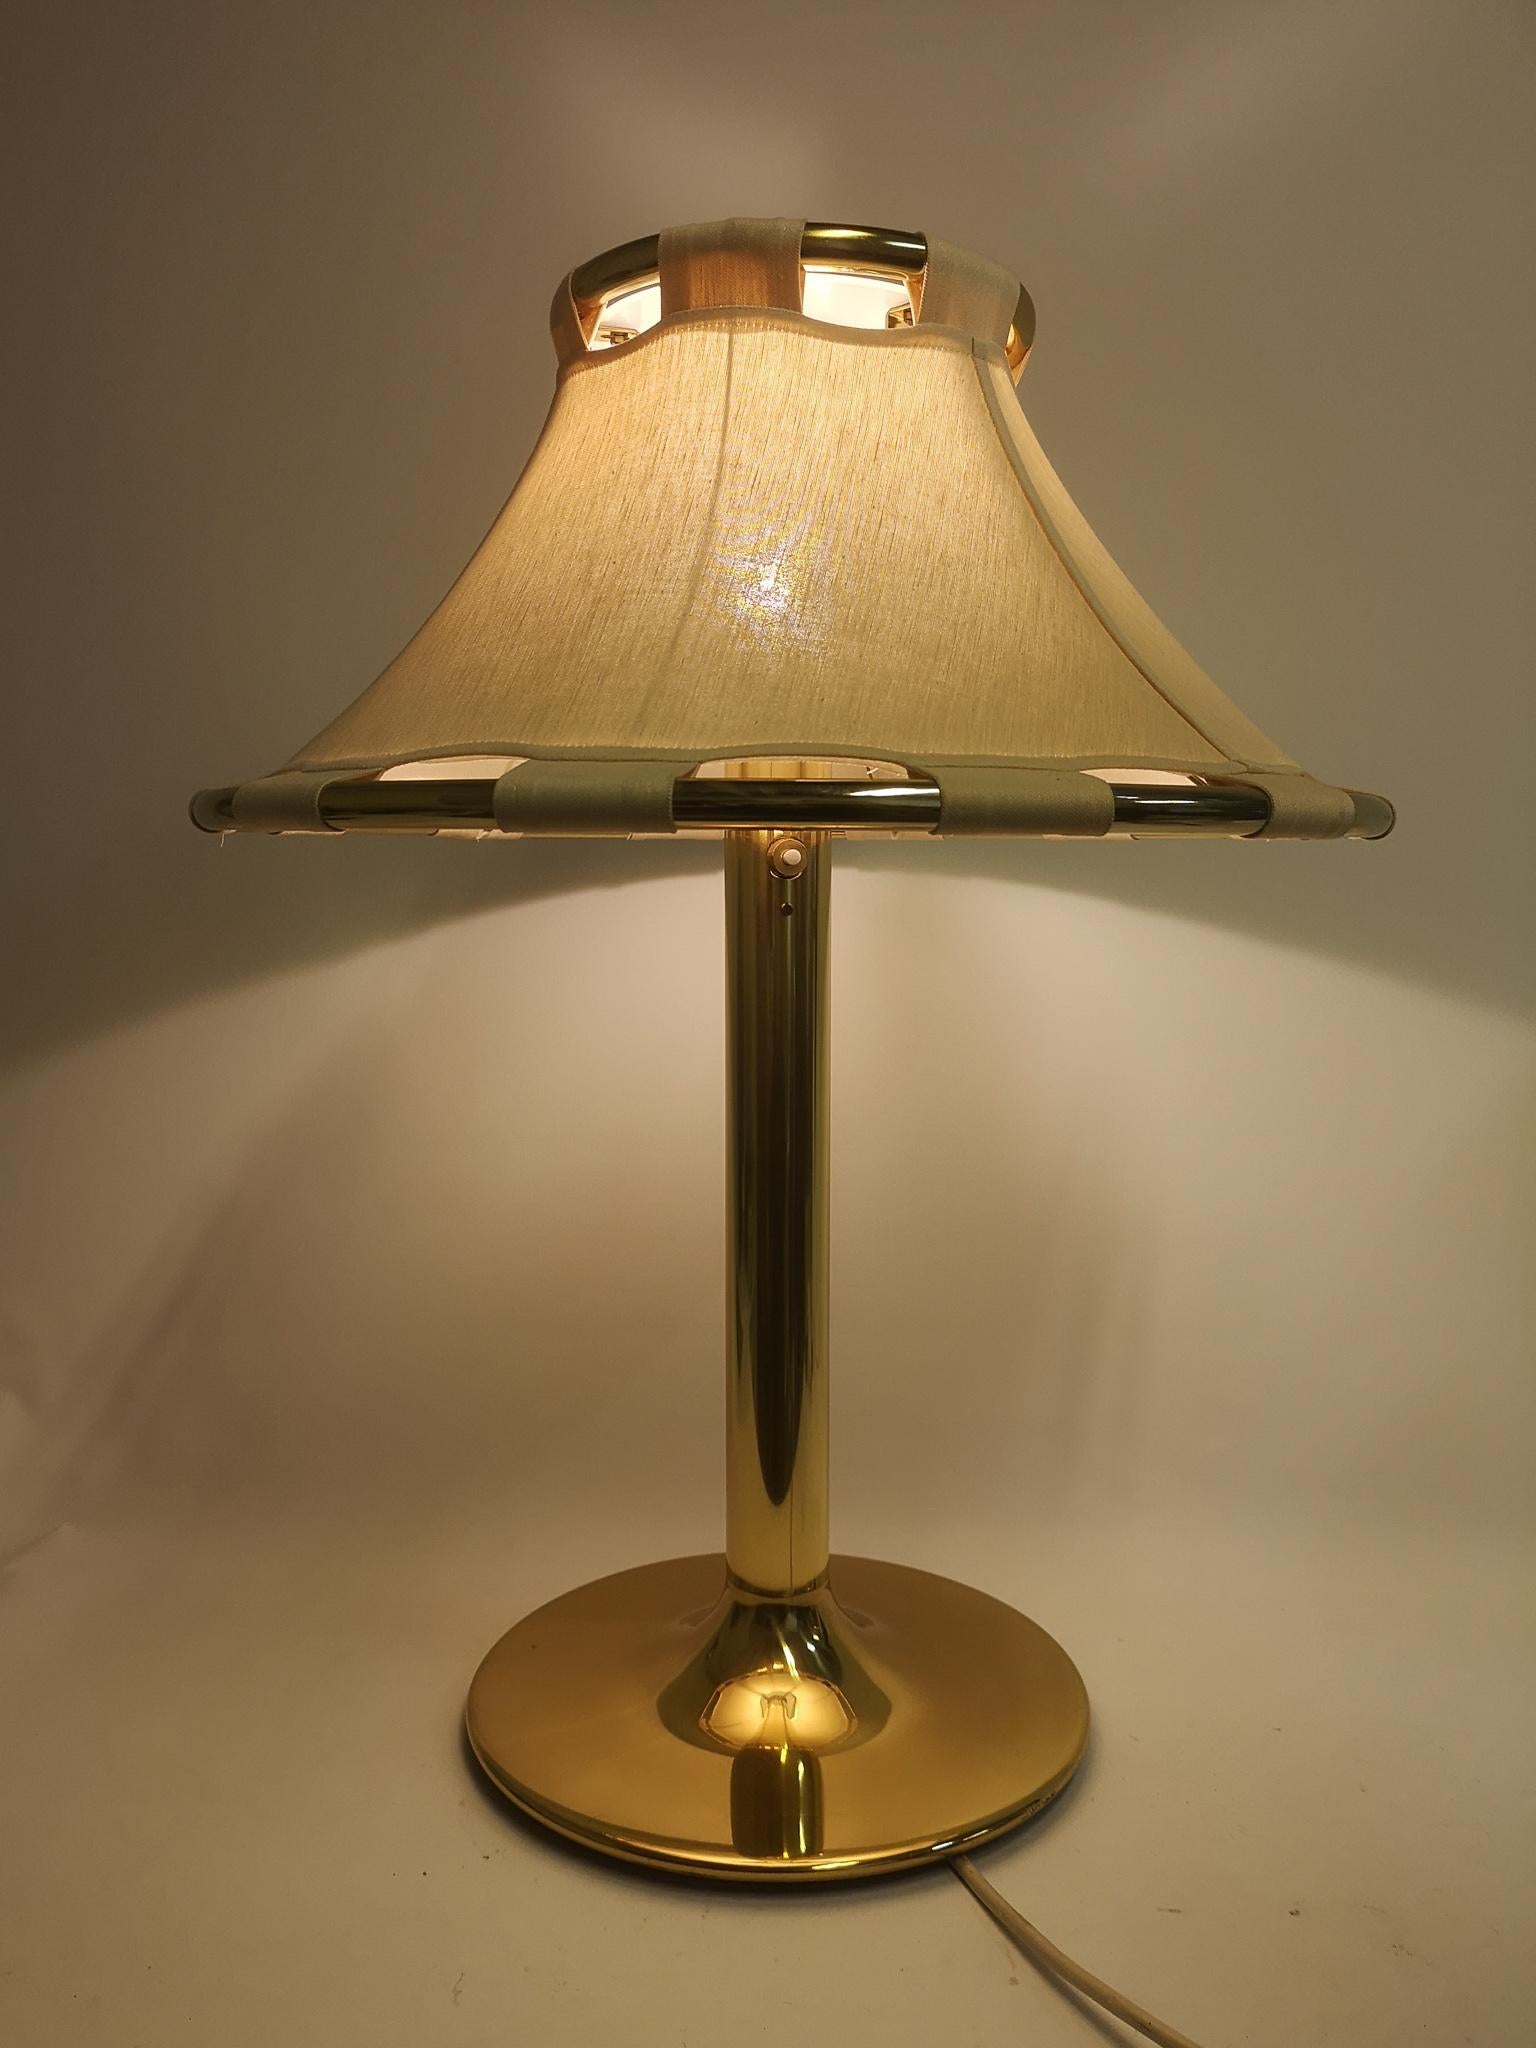 This 1970s table lamp, model 